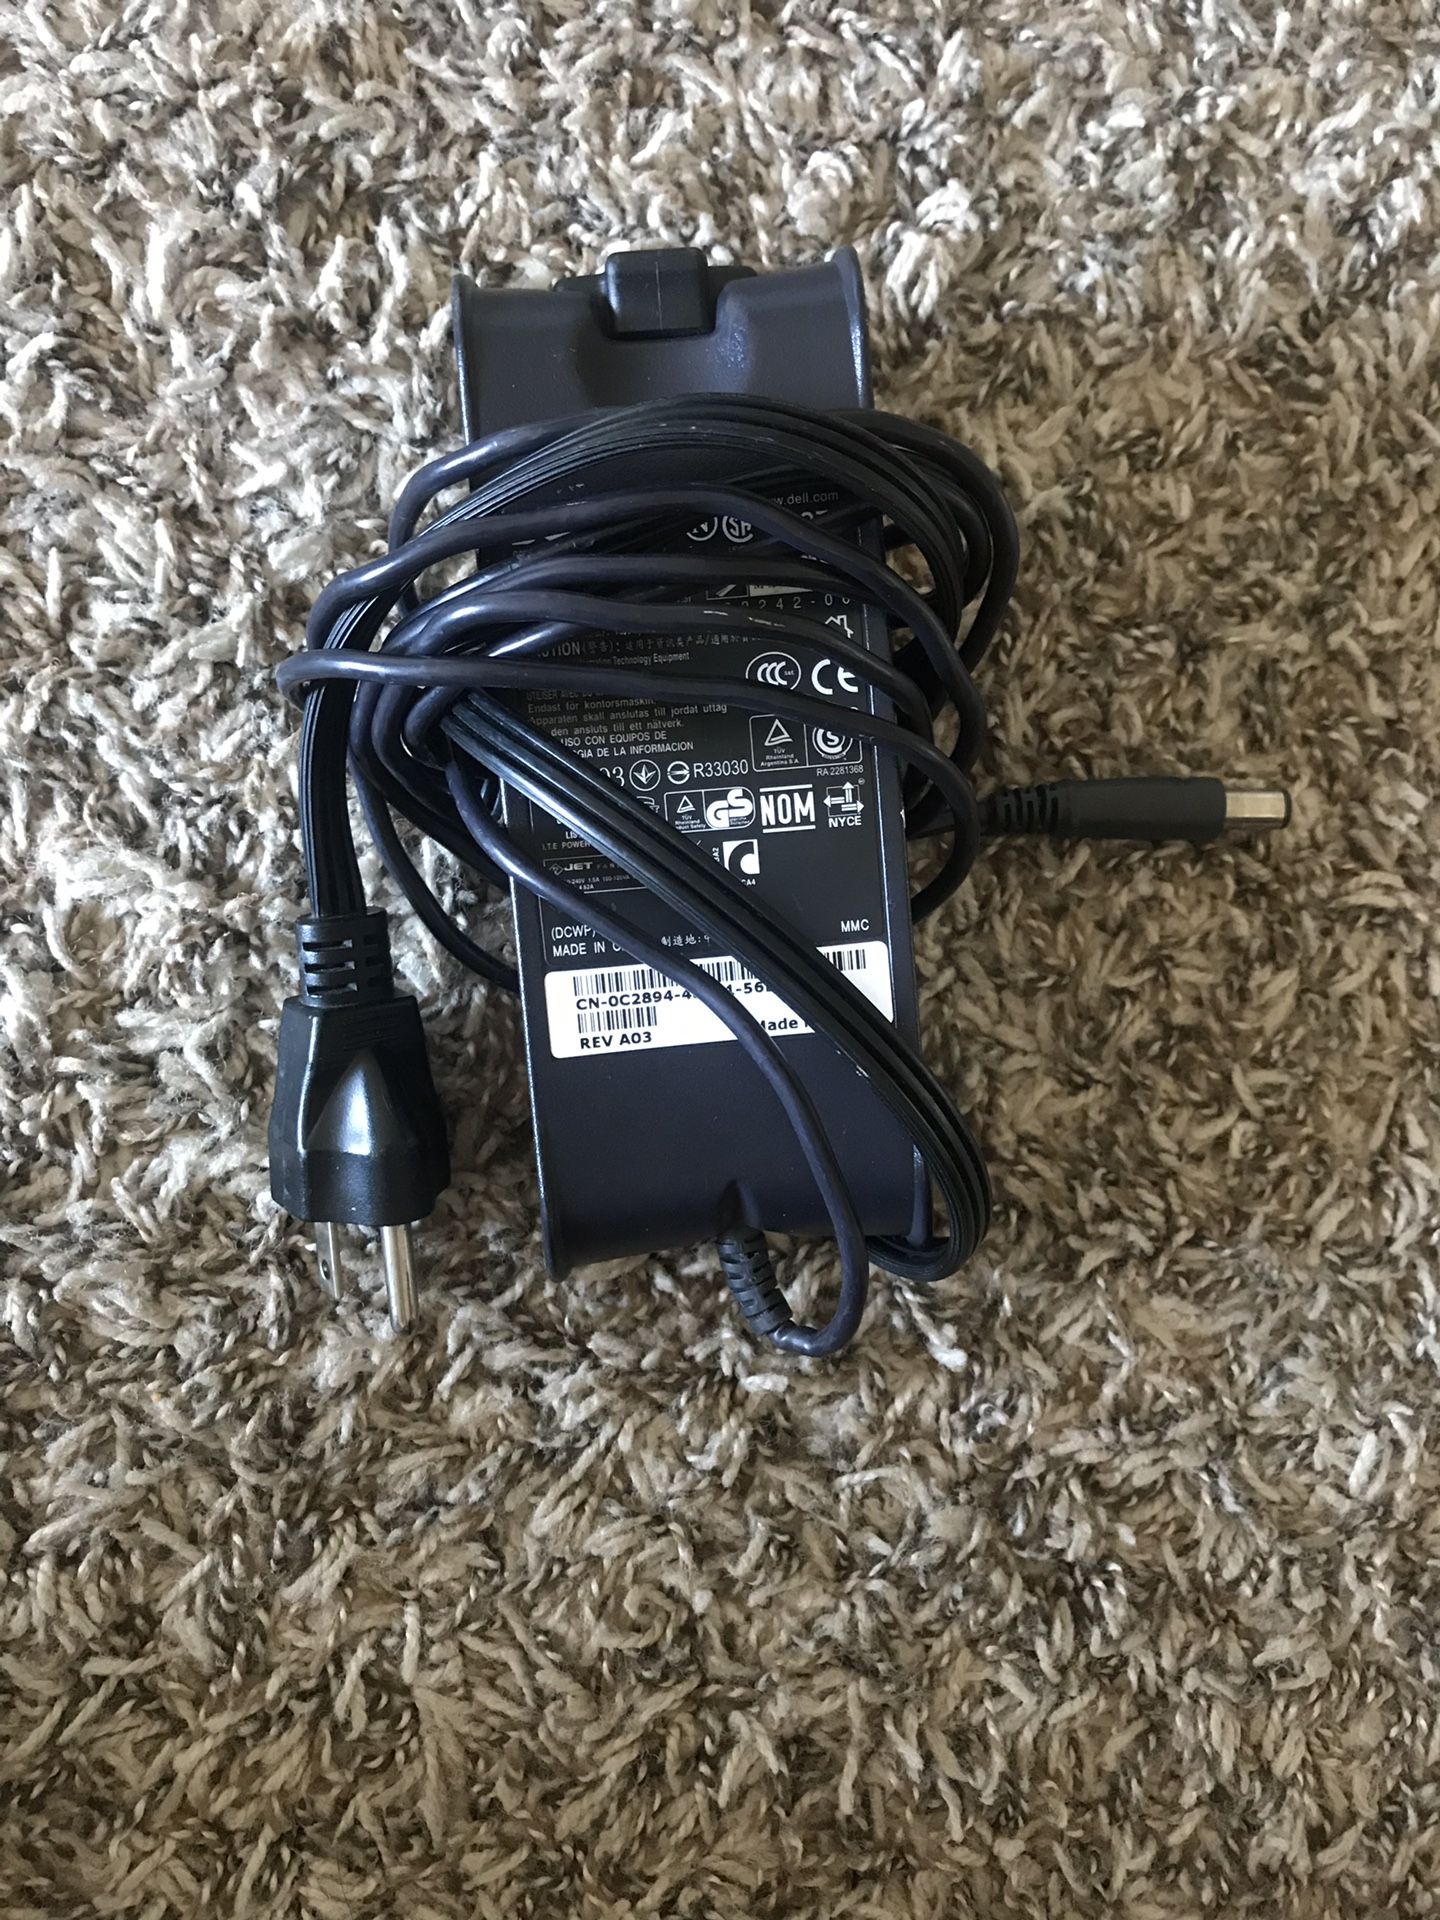 Dell Laptop Charger